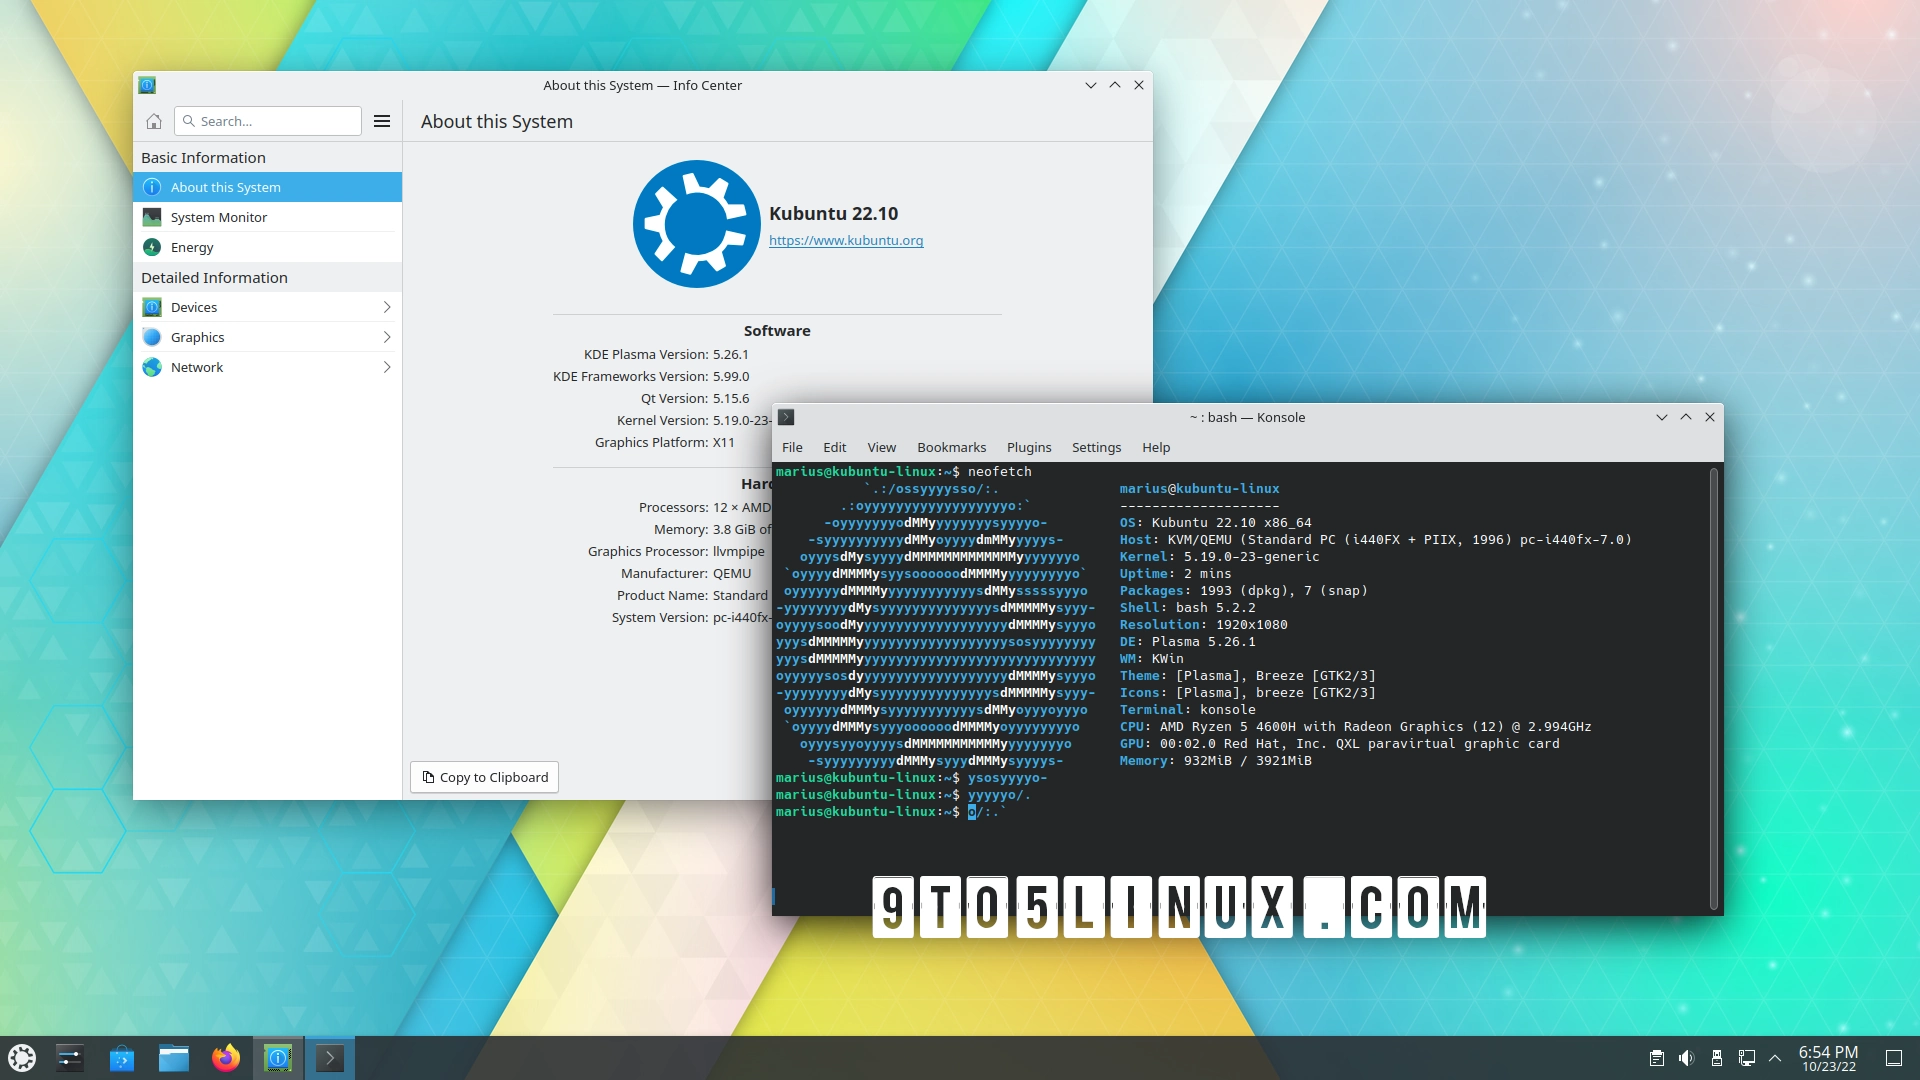 You Can Now Install KDE Plasma 5.26 on Kubuntu 22.10, Here’s How